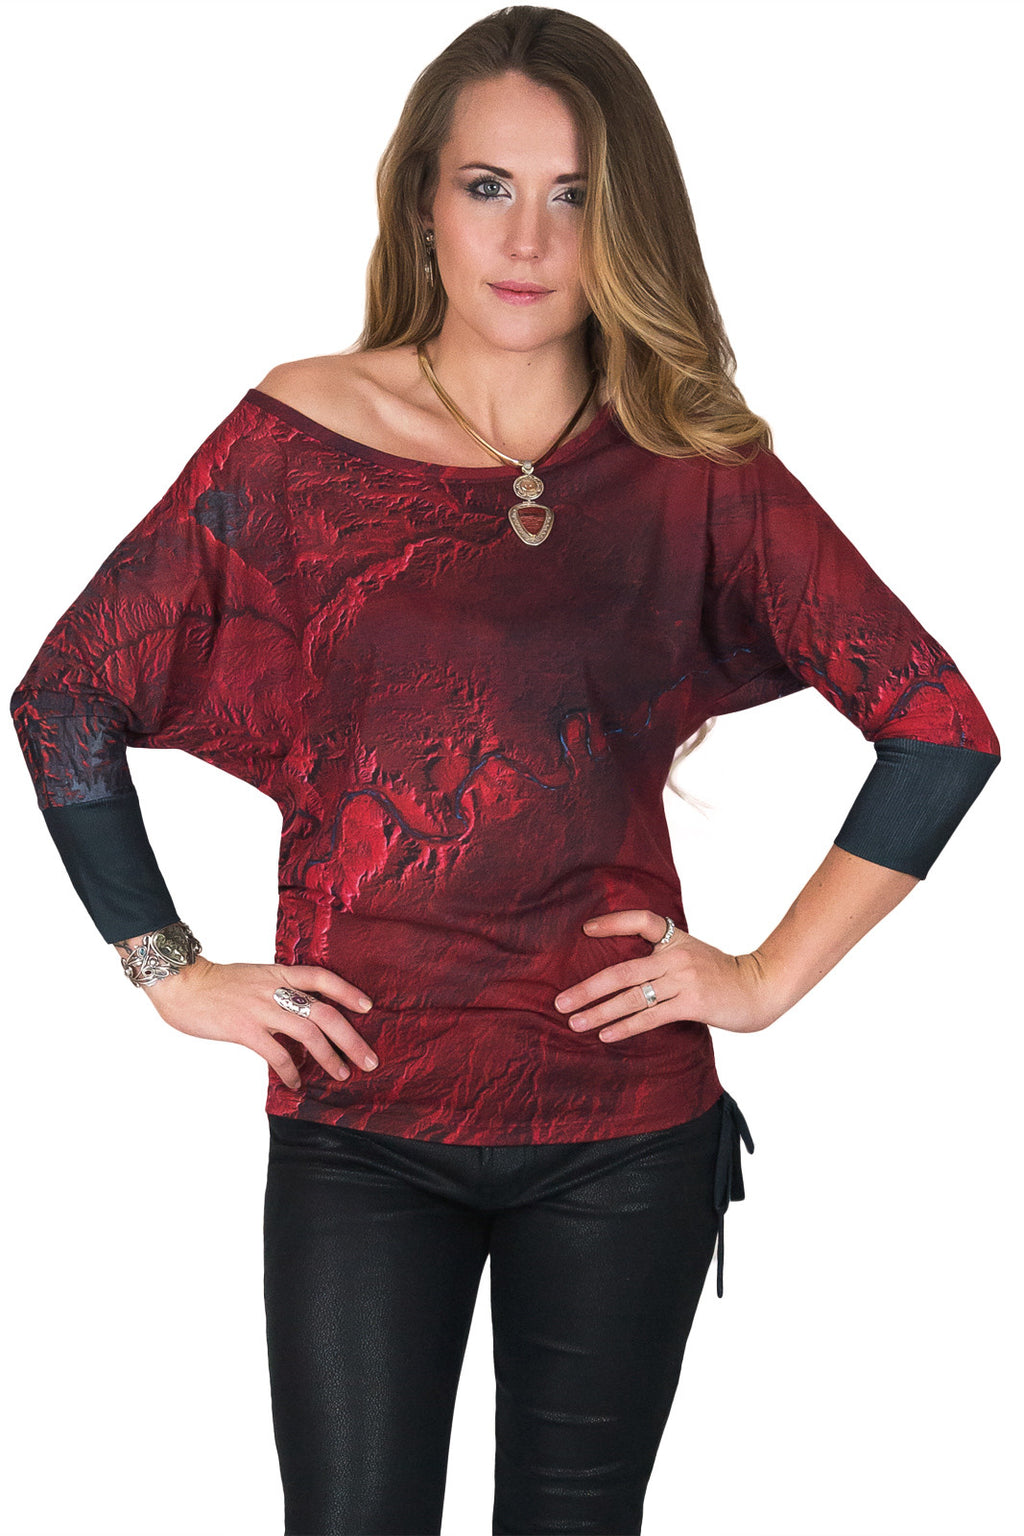 Dolman Top-Travel our World Top-Printed Nature Clothing-Desolation Canyon